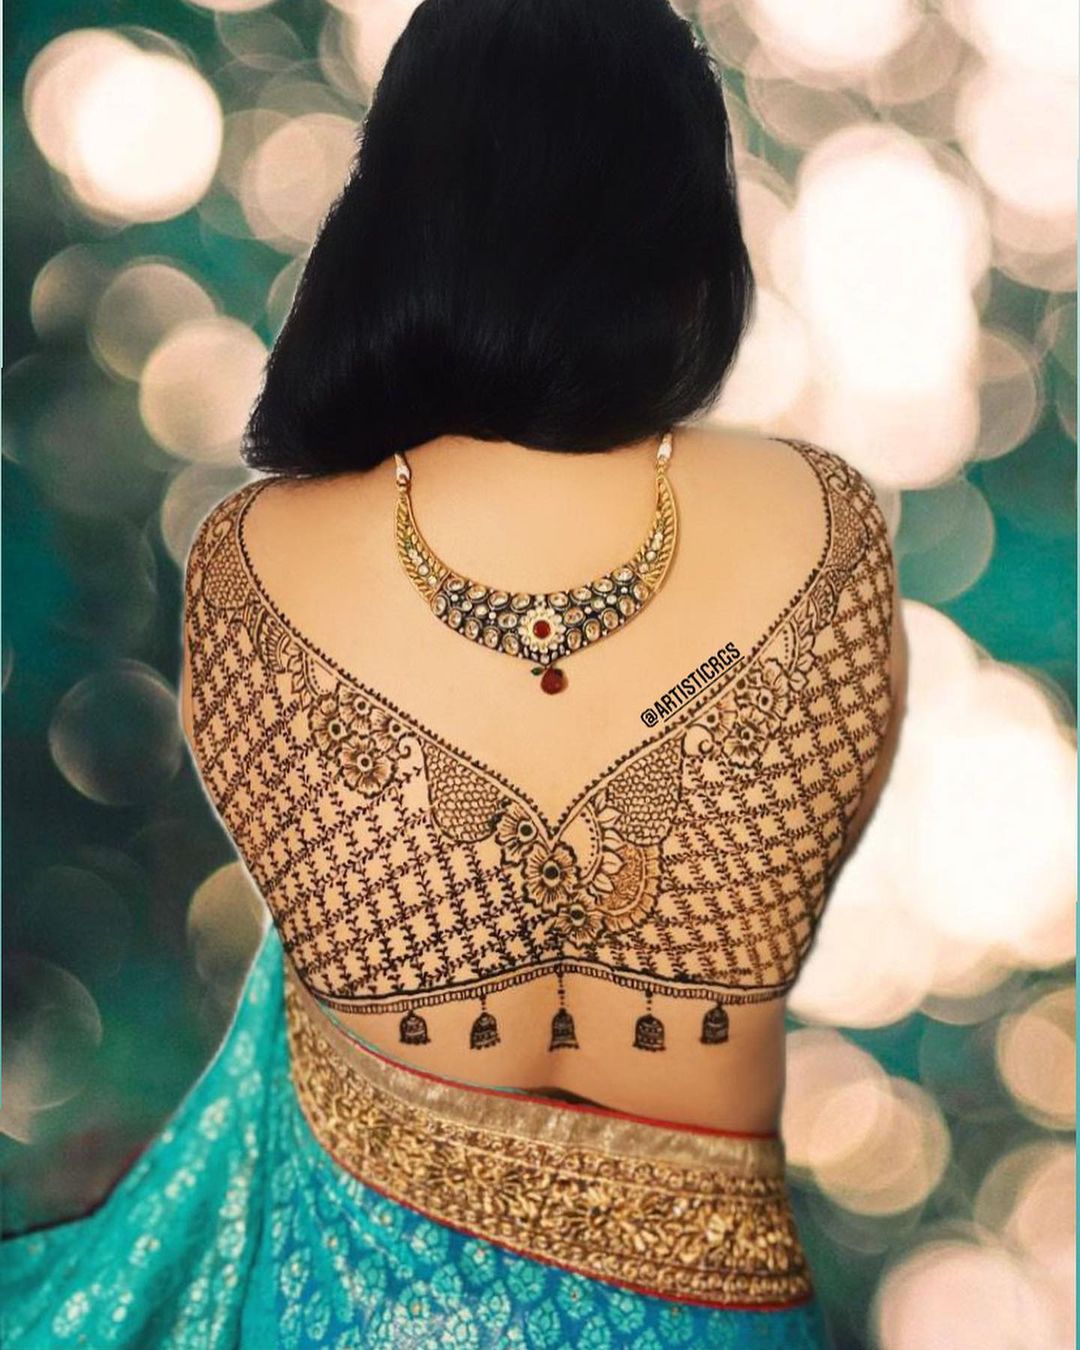 Blouse Mehndi Designs On Body You Can Try In 2022